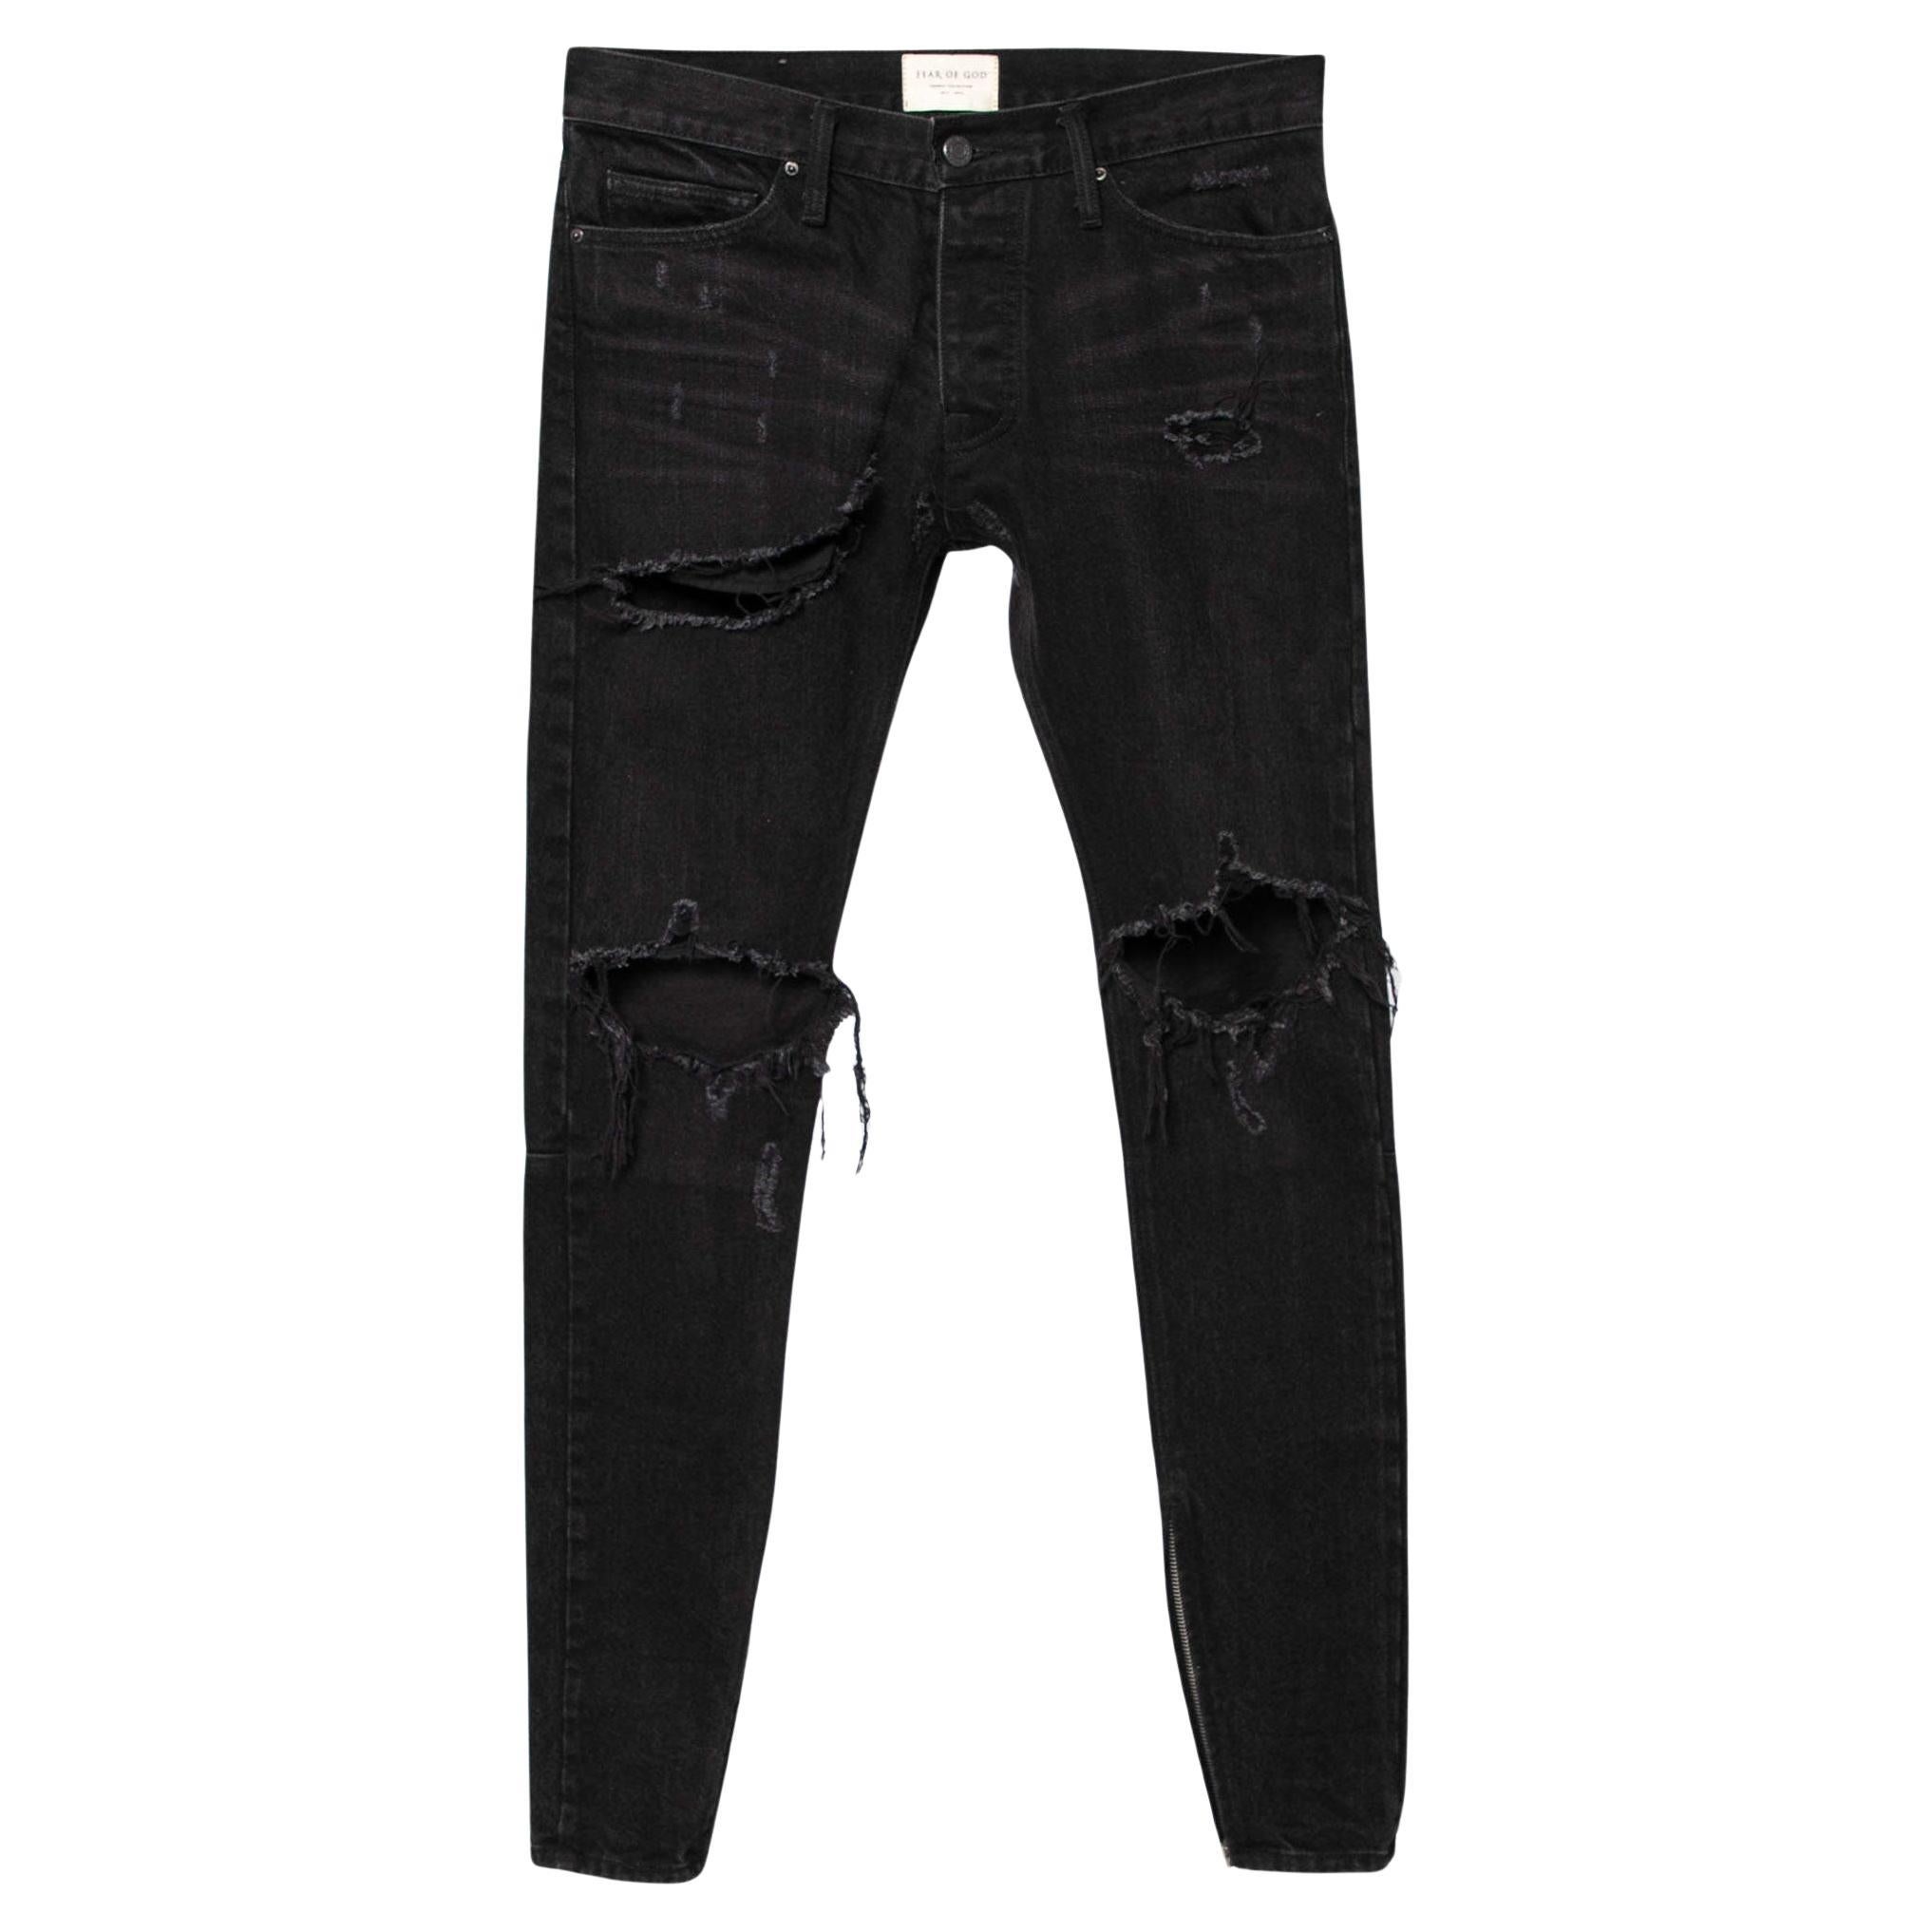 Fear of God Fourth Collection Black Distressed Zipped Hem Jeans M